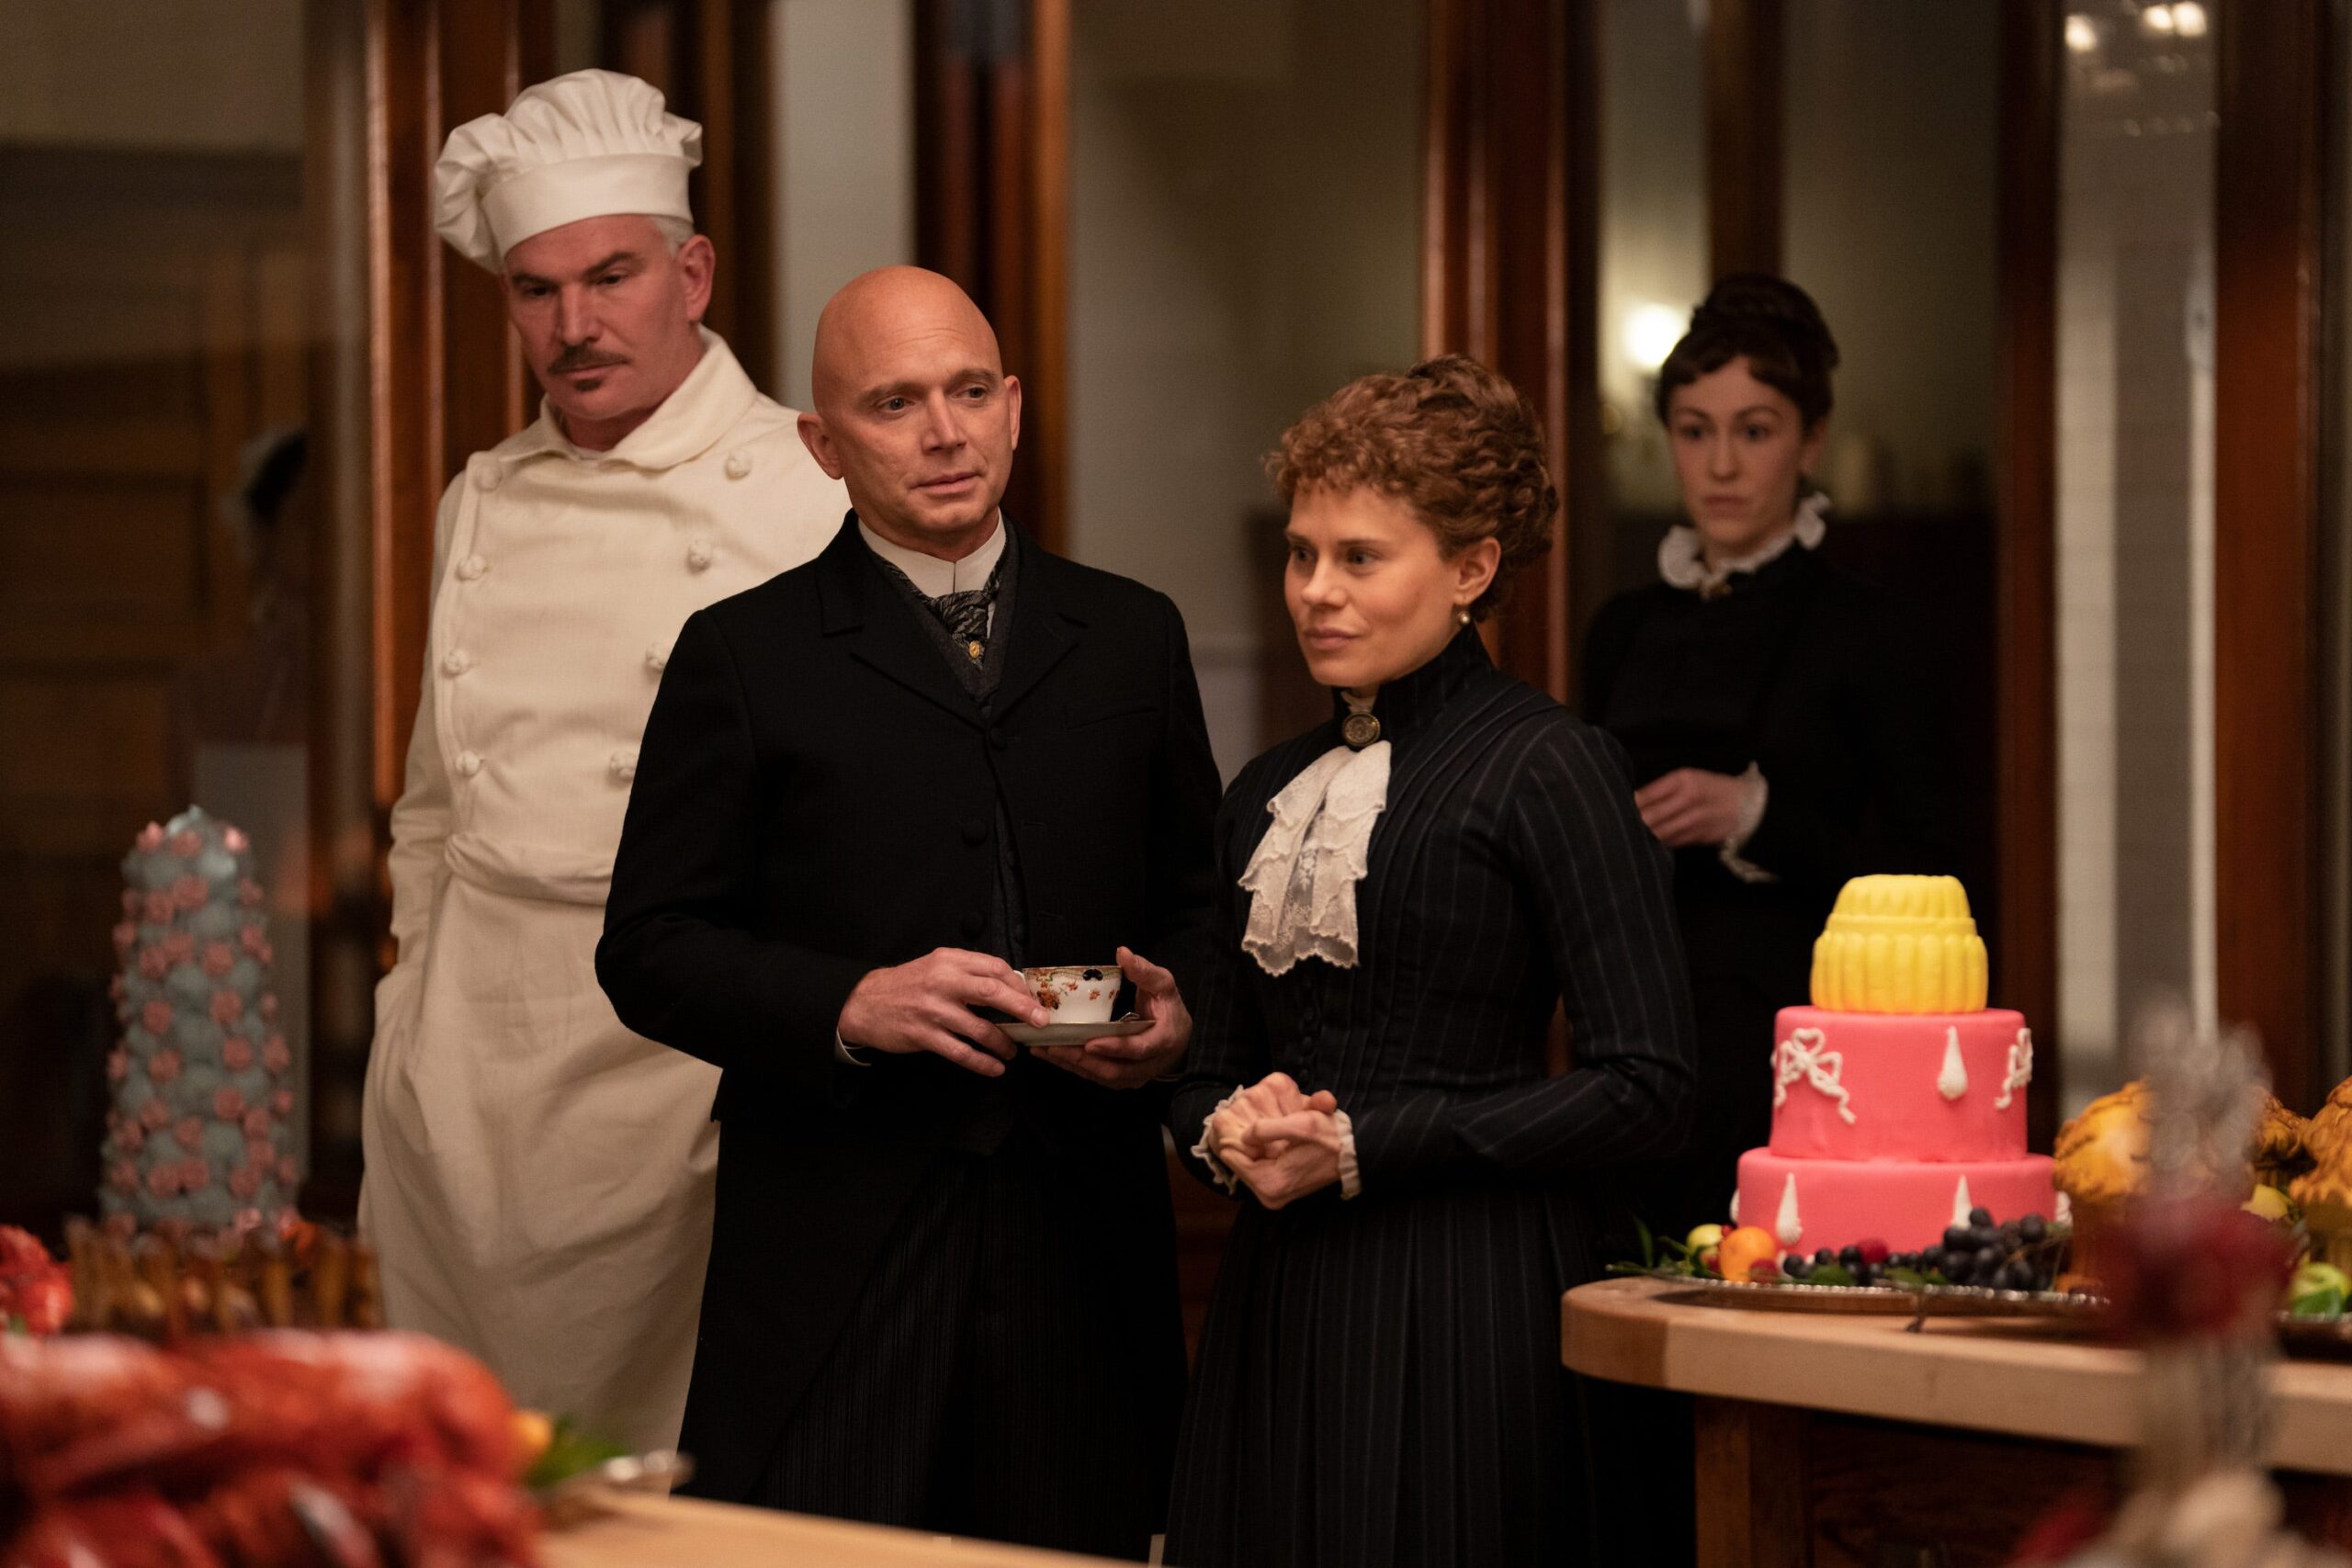 Douglas Sills, Michael Cerveris, Celia Keenan-Bolger, and Kelley Curran in HBO's The Gilded Age. Photo by Alison Cohen Rosa/HBO.